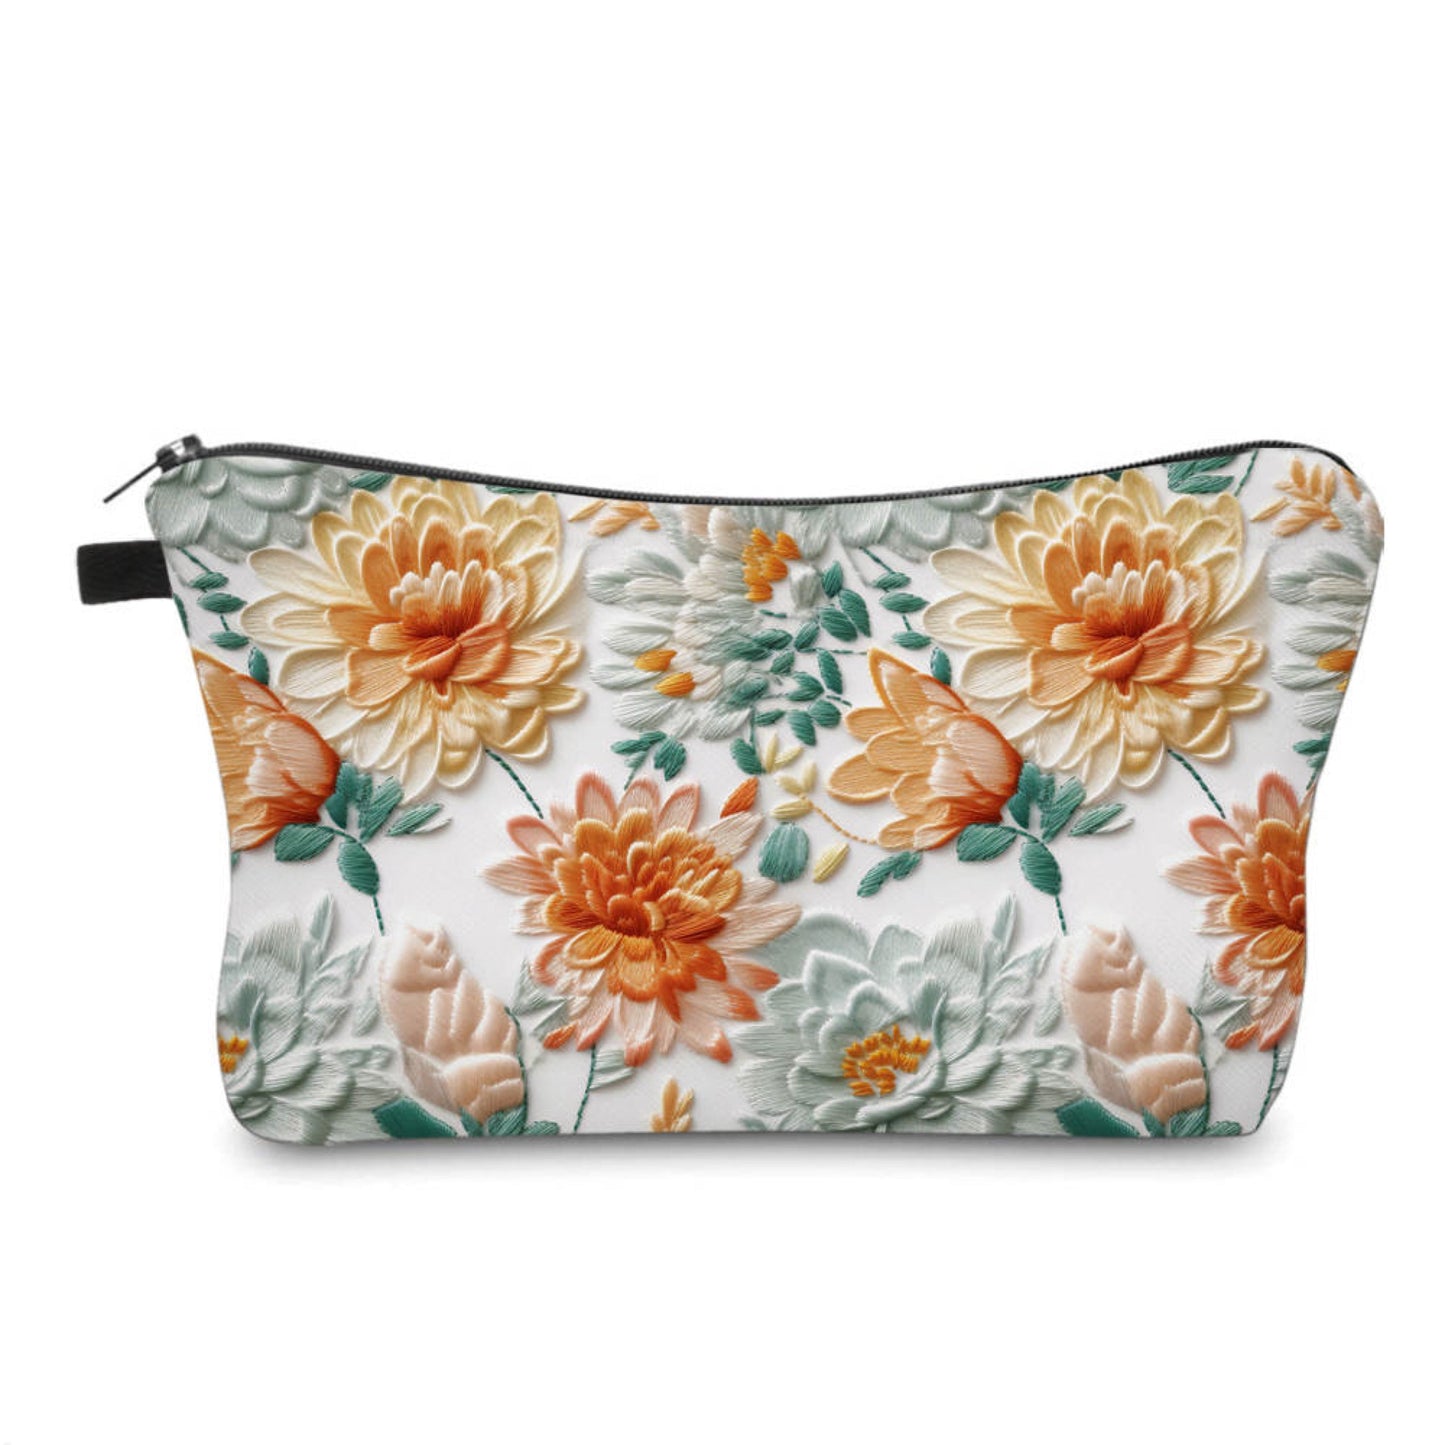 Pouch - Floral, White Peach Embroidery